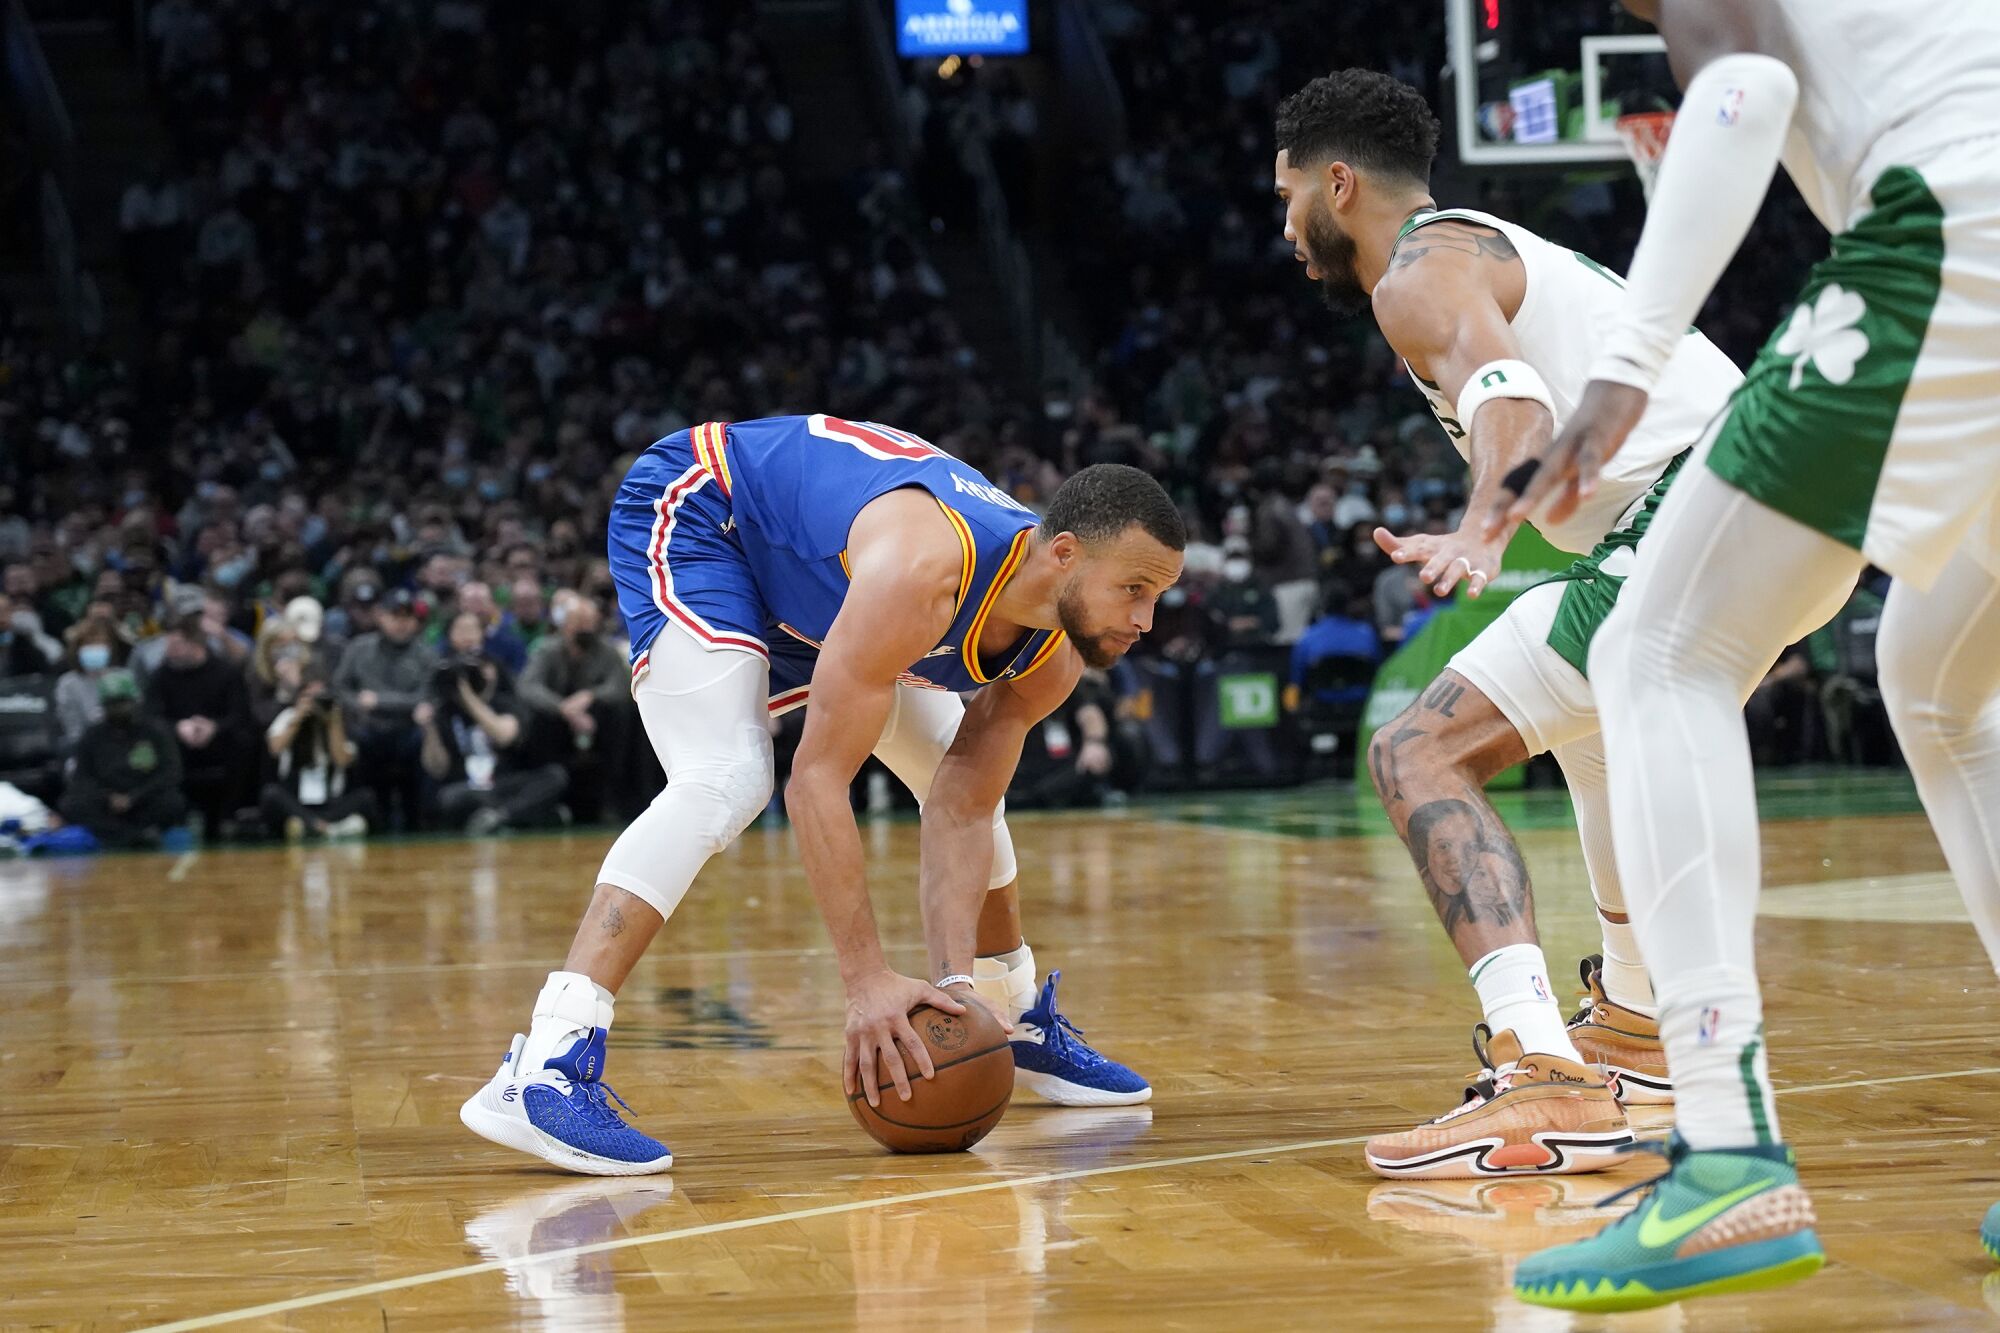 Warriors guard Stephen Curry puts the ball on the court as he sized up Celtics defender Jayson Tatum.